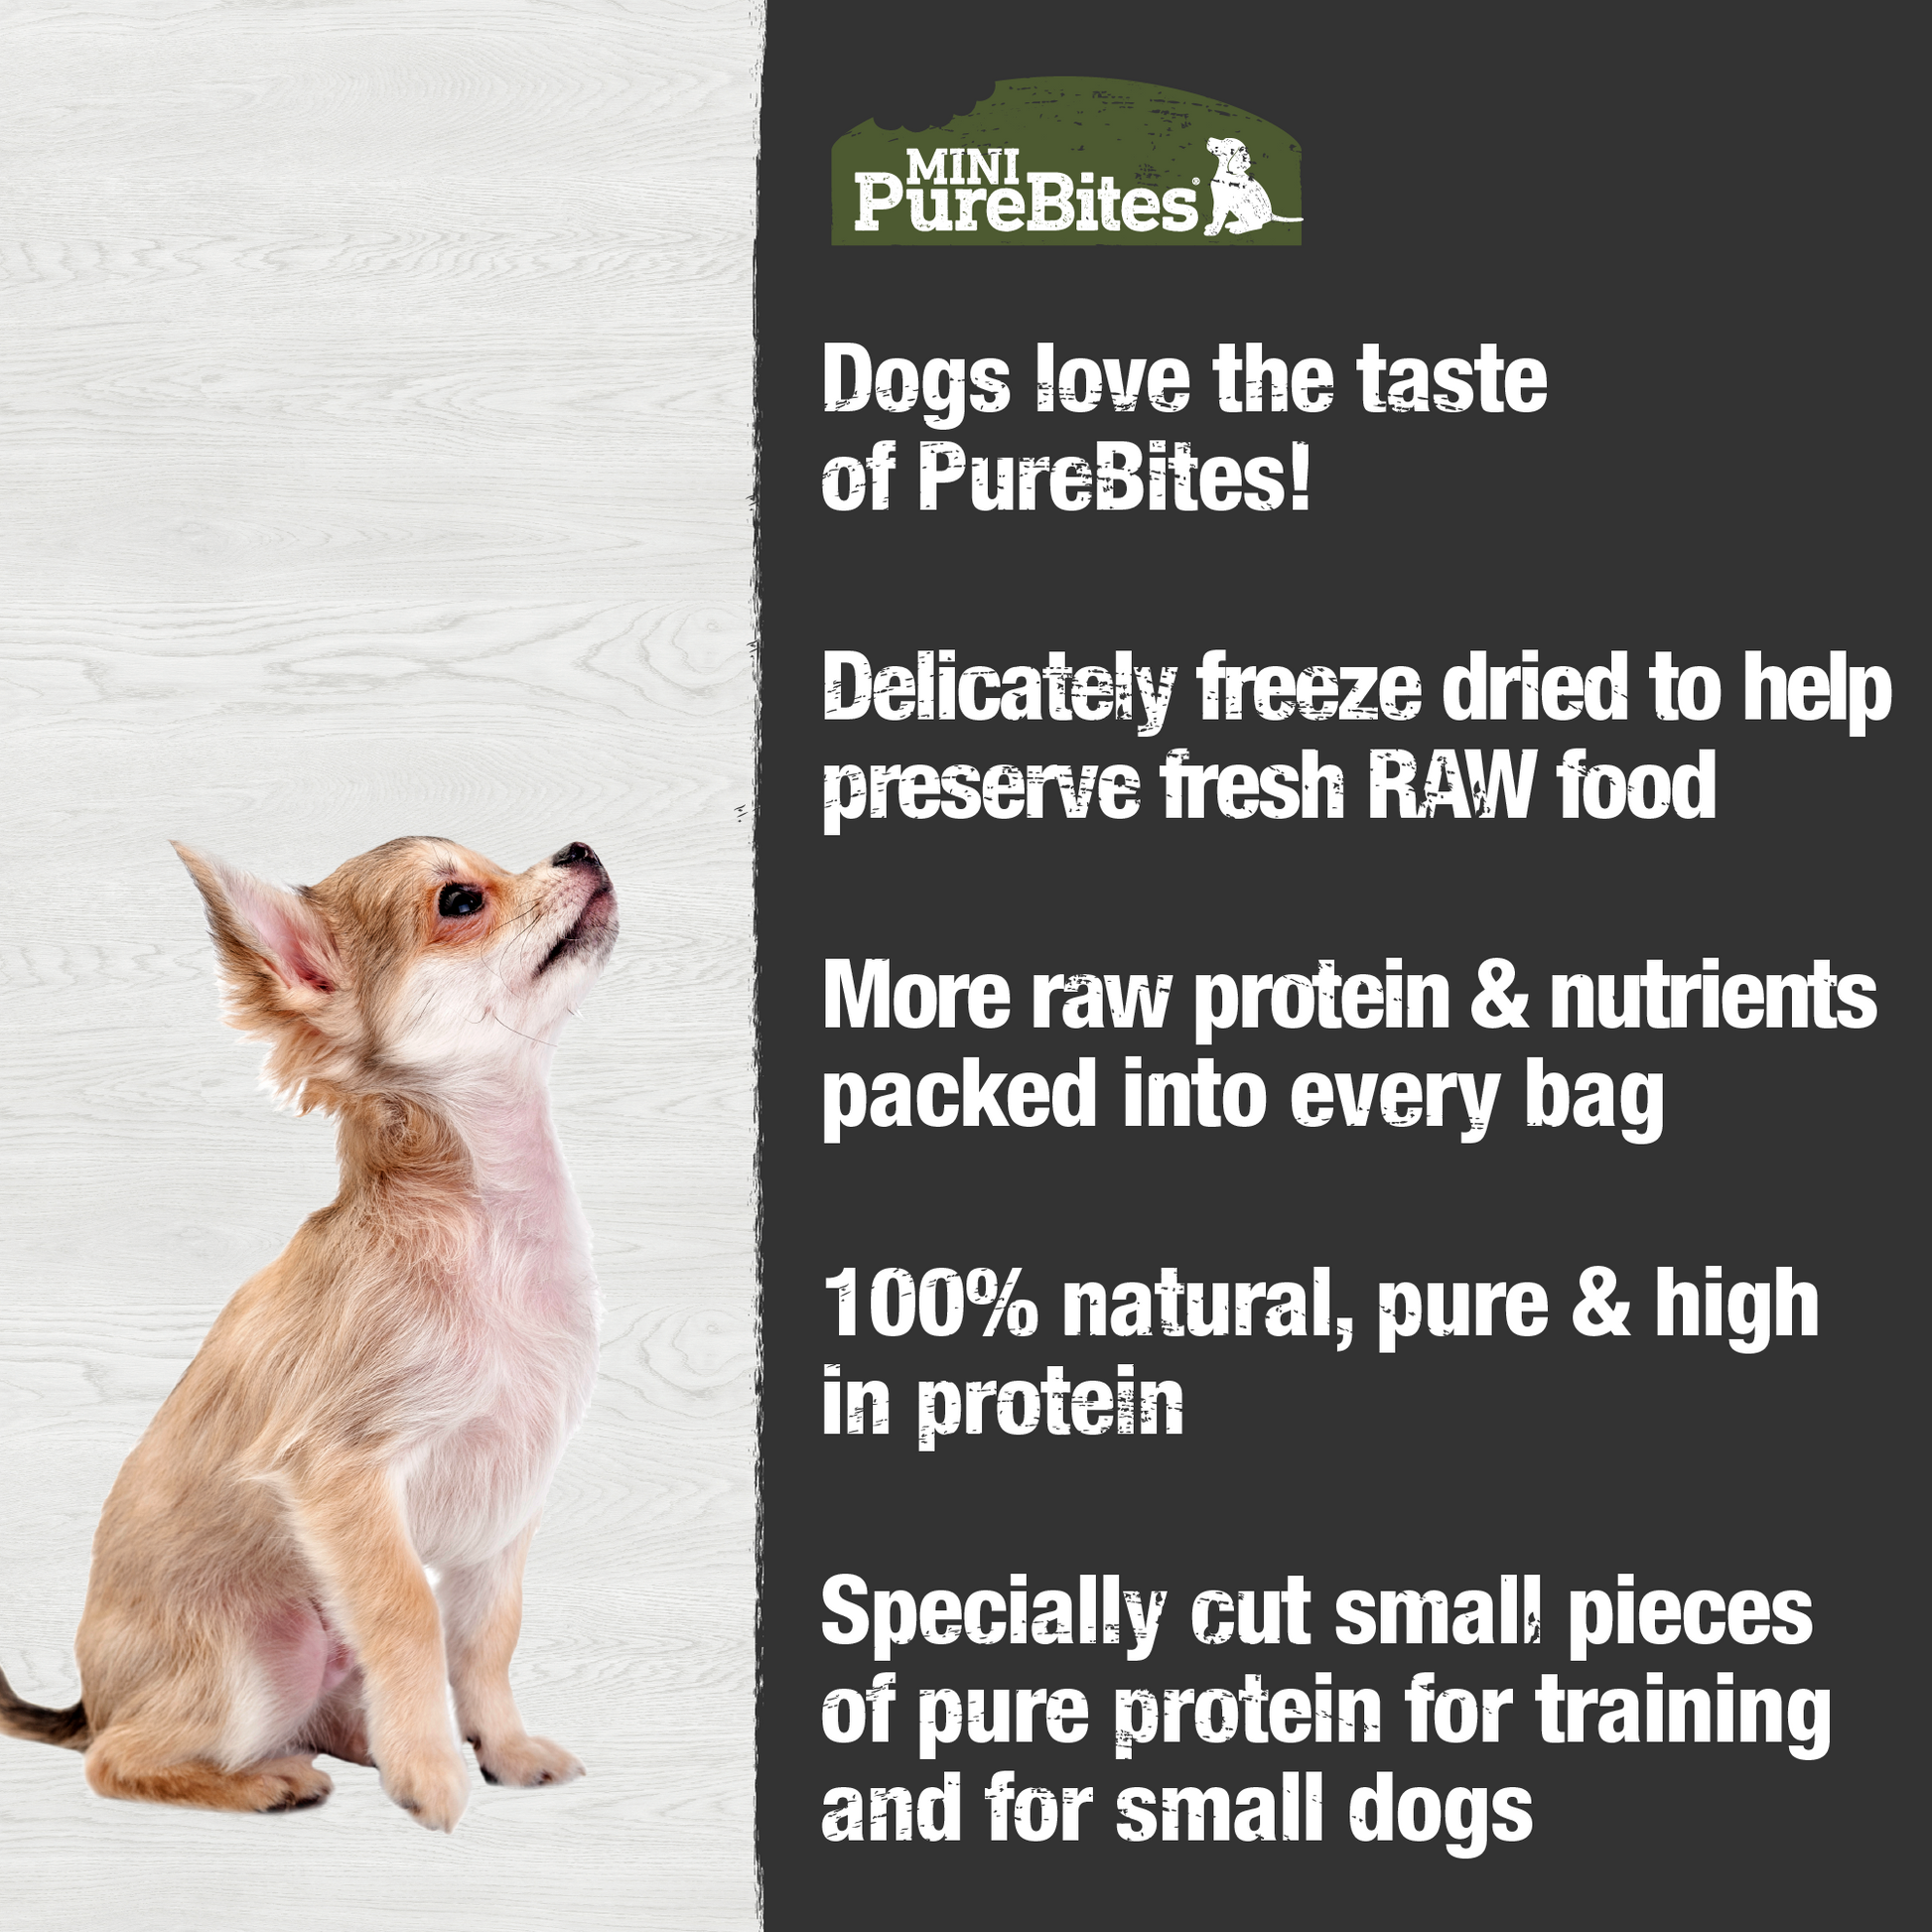 Made fresh & pure means more RAW protein and nutrients packed into every bag. Our beef liver is freeze dried to help preserve its RAW taste, and nutrition, and mirror a dog’s ancestral diet